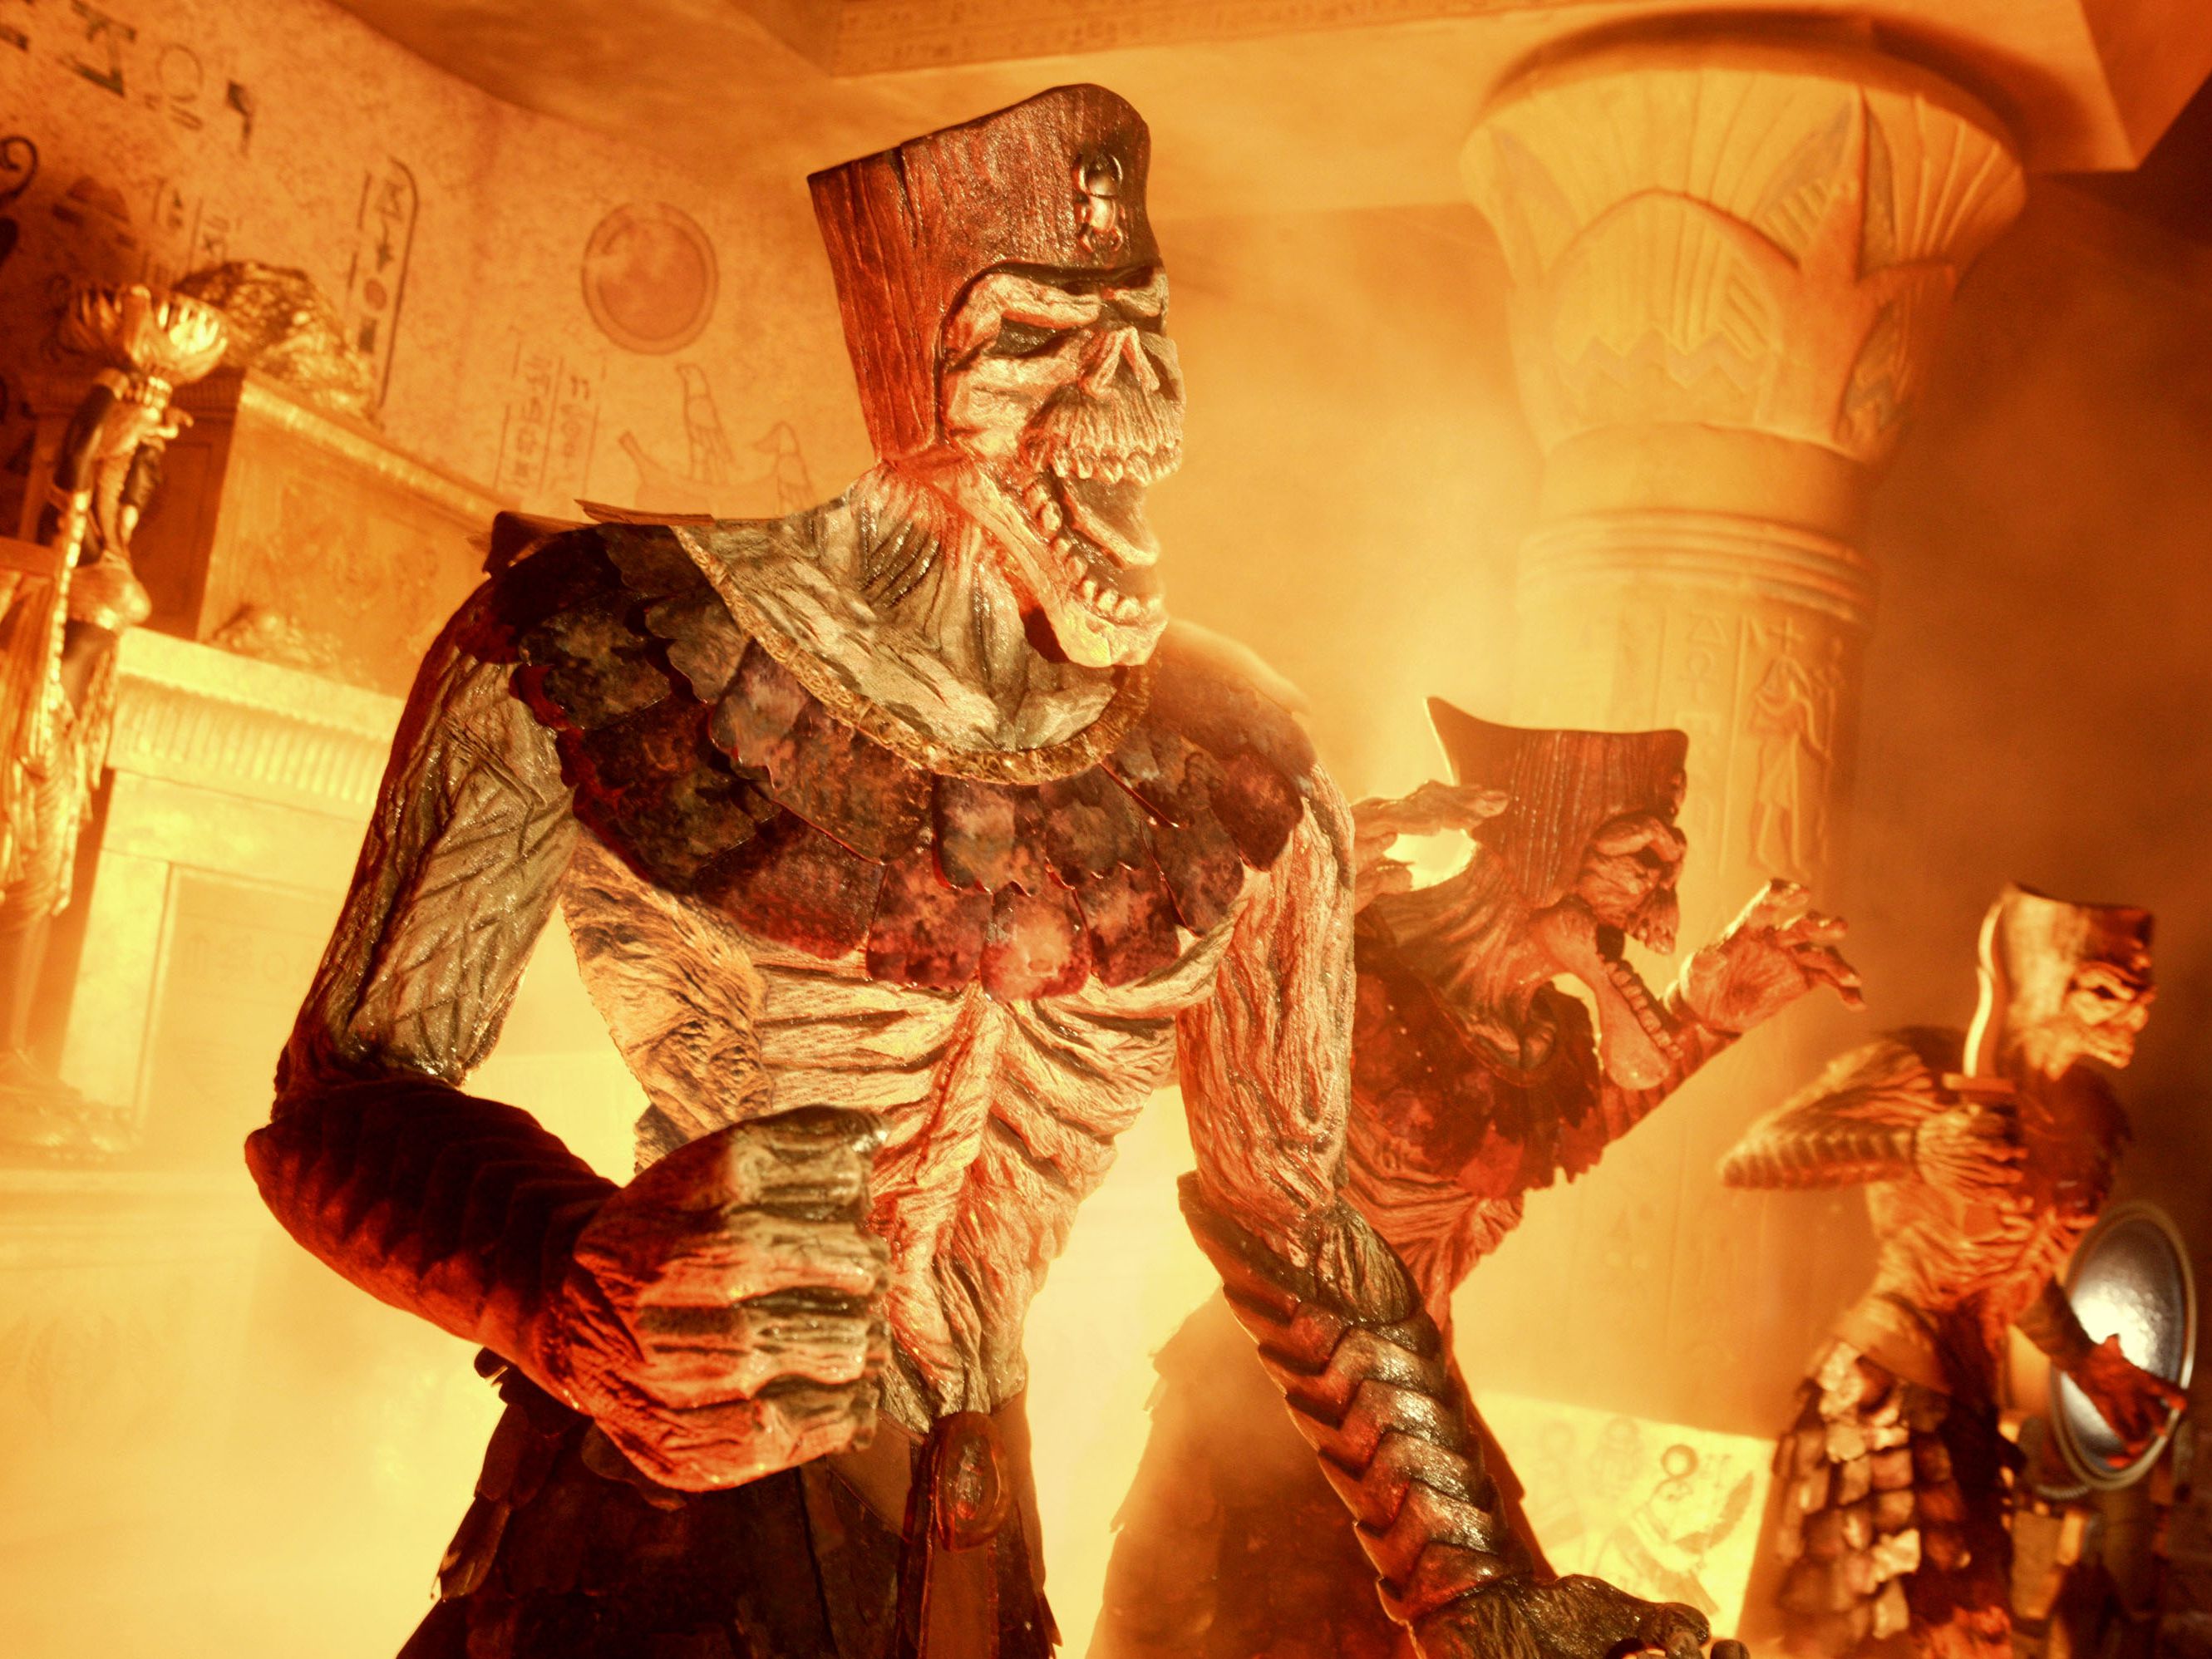 A practical effect mummy as seen on Revenge of the Mummy